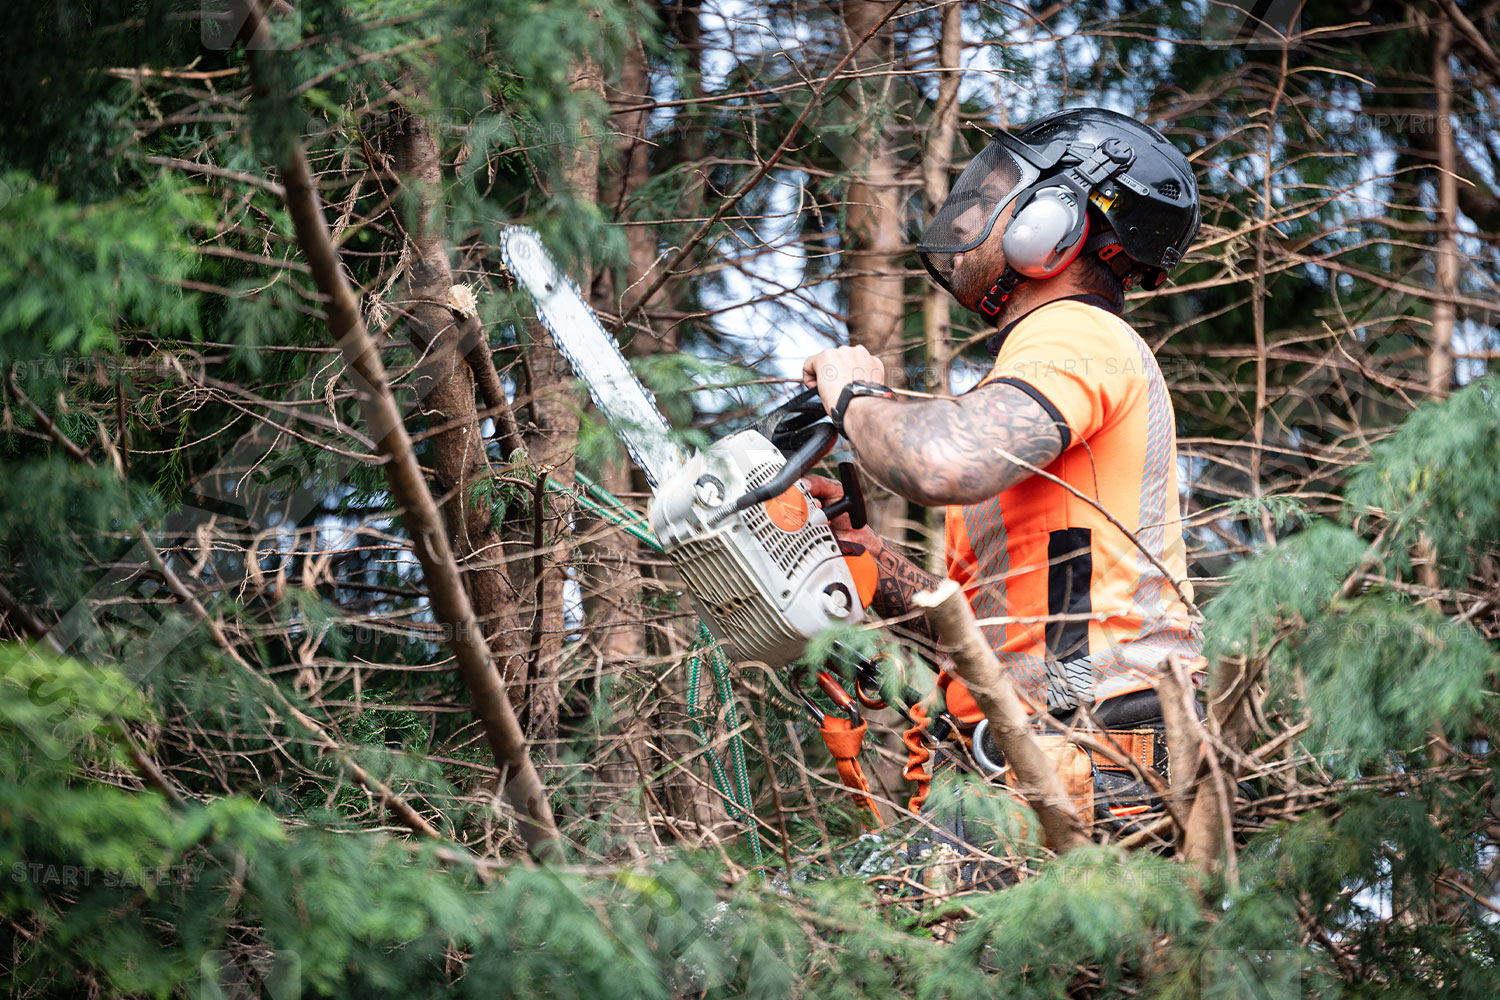 Worker With A Chain Saw Cutting Trees While Wearing A Hard Hat